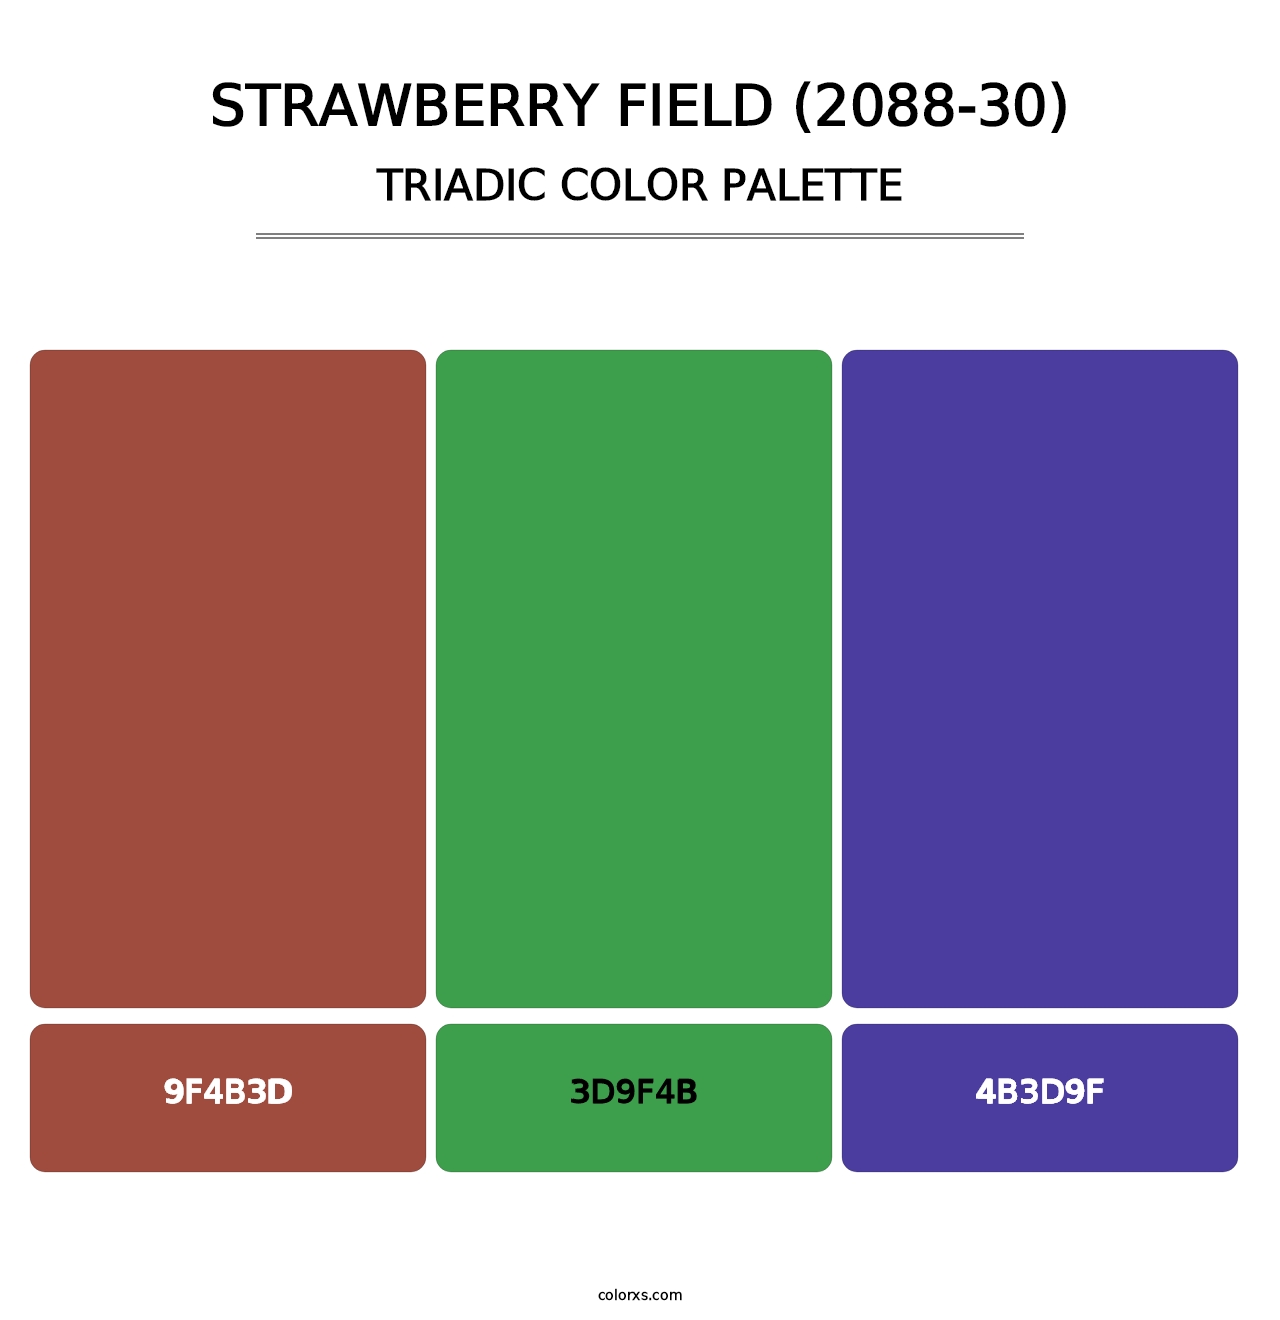 Strawberry Field (2088-30) - Triadic Color Palette